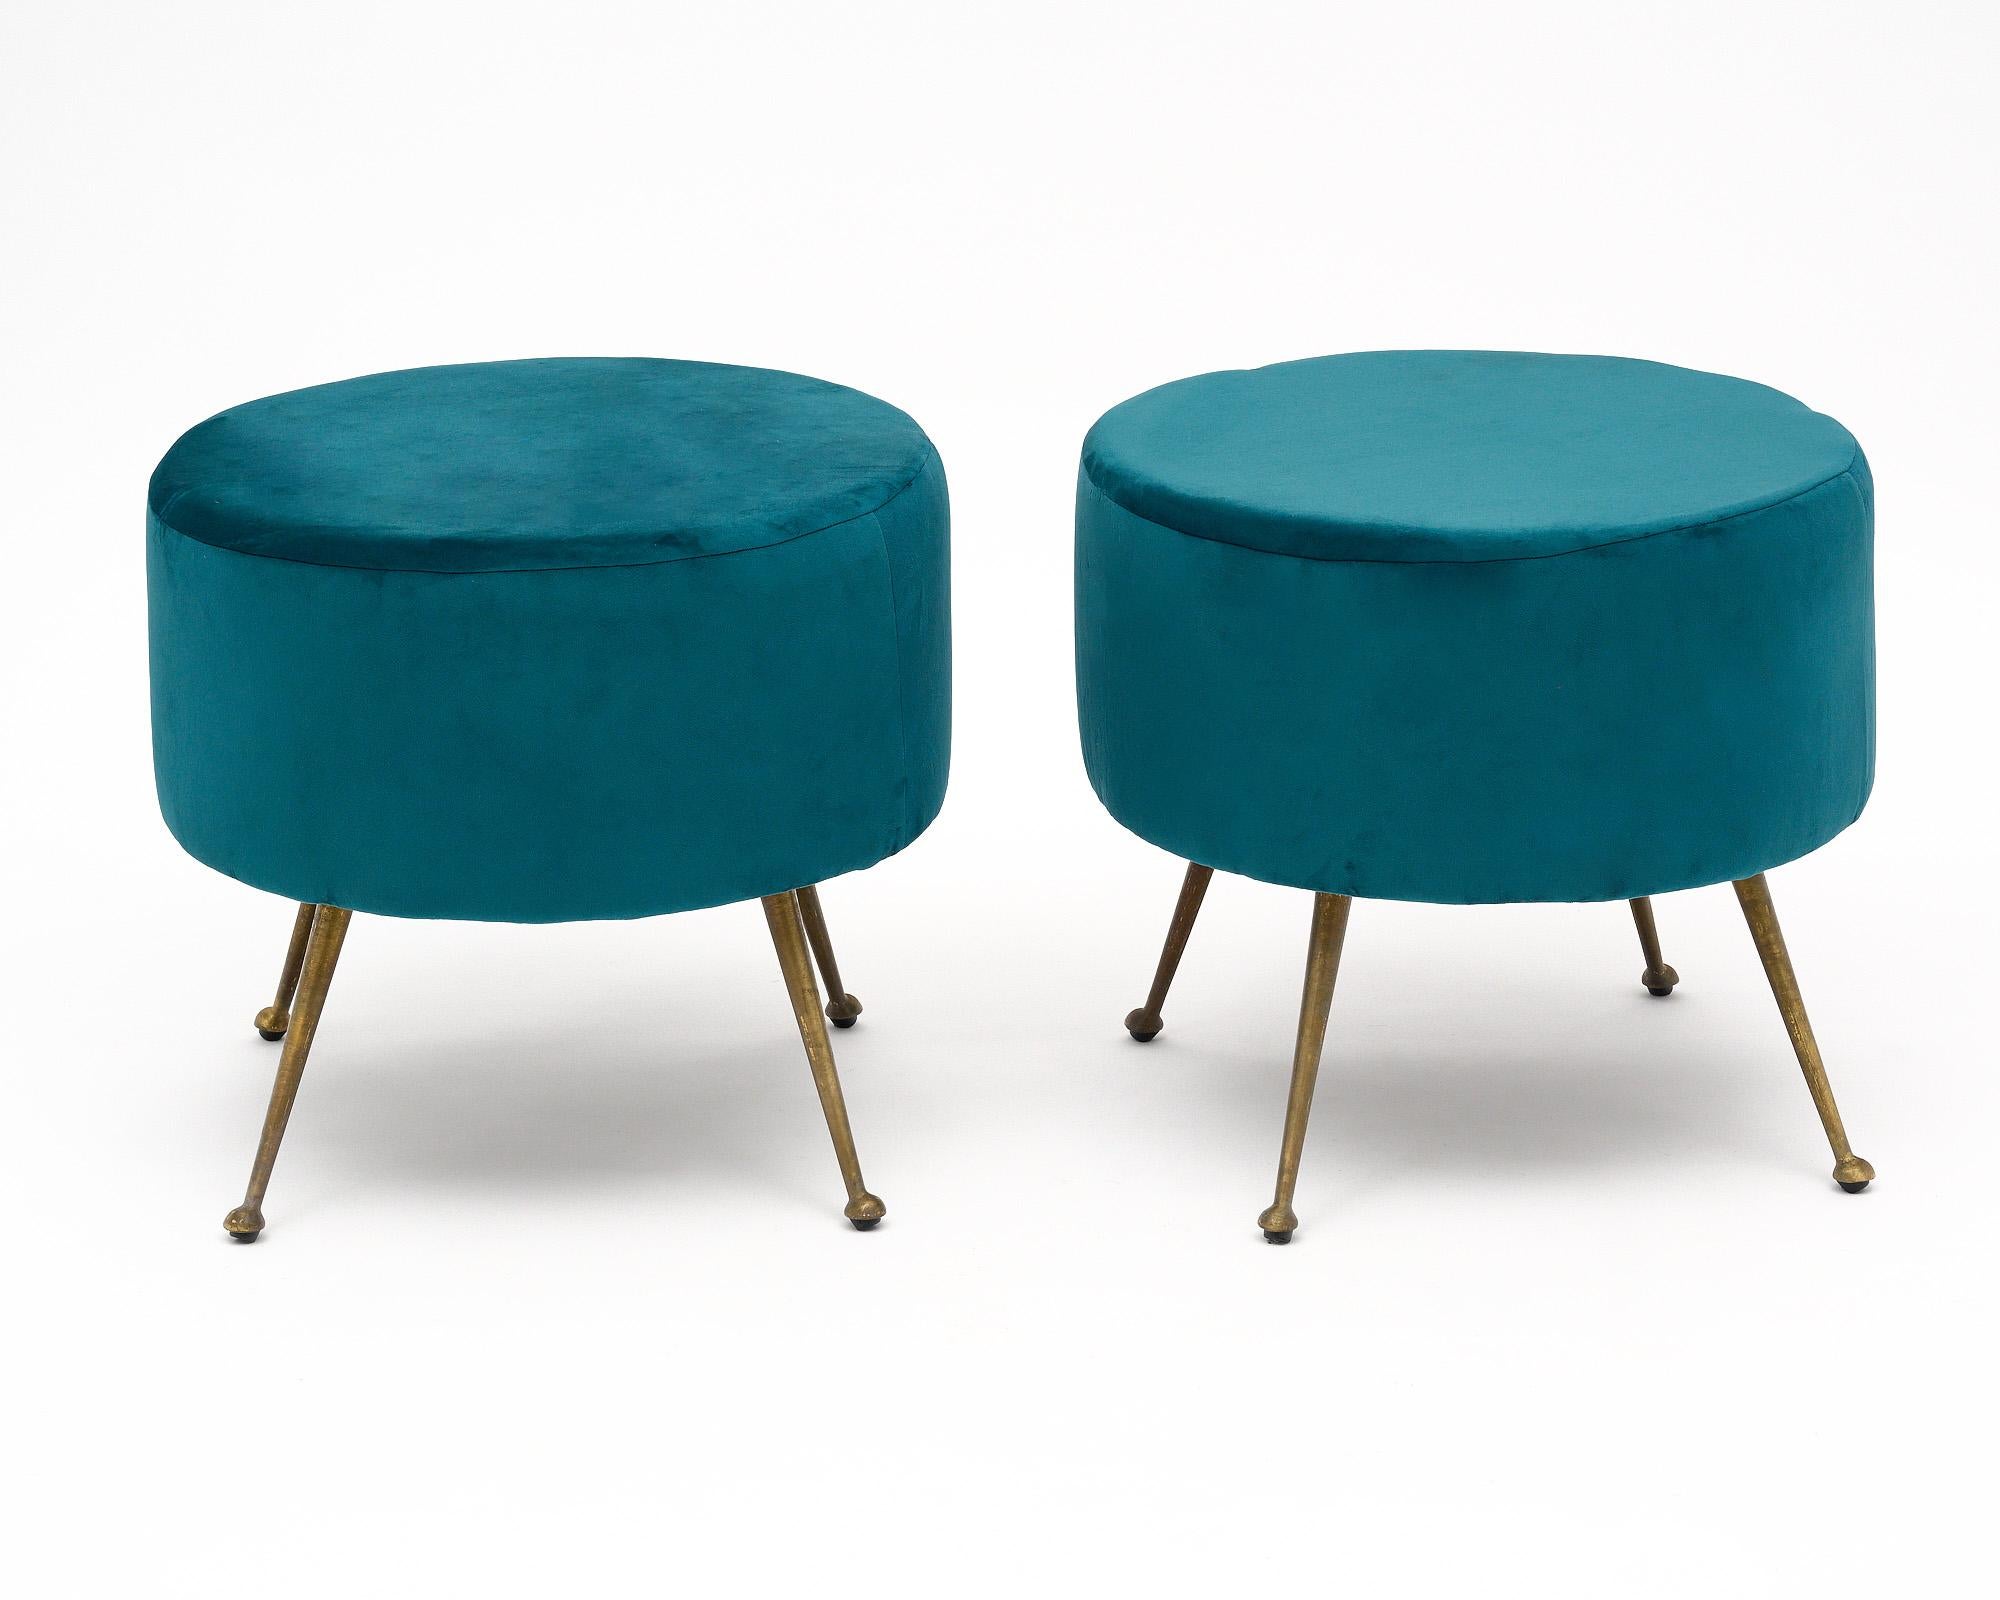 Pair of Italian mid-century modern stools that have been newly upholstered in a teal colored micro fiber. Four original tapered, flared brass legs support the seat.
